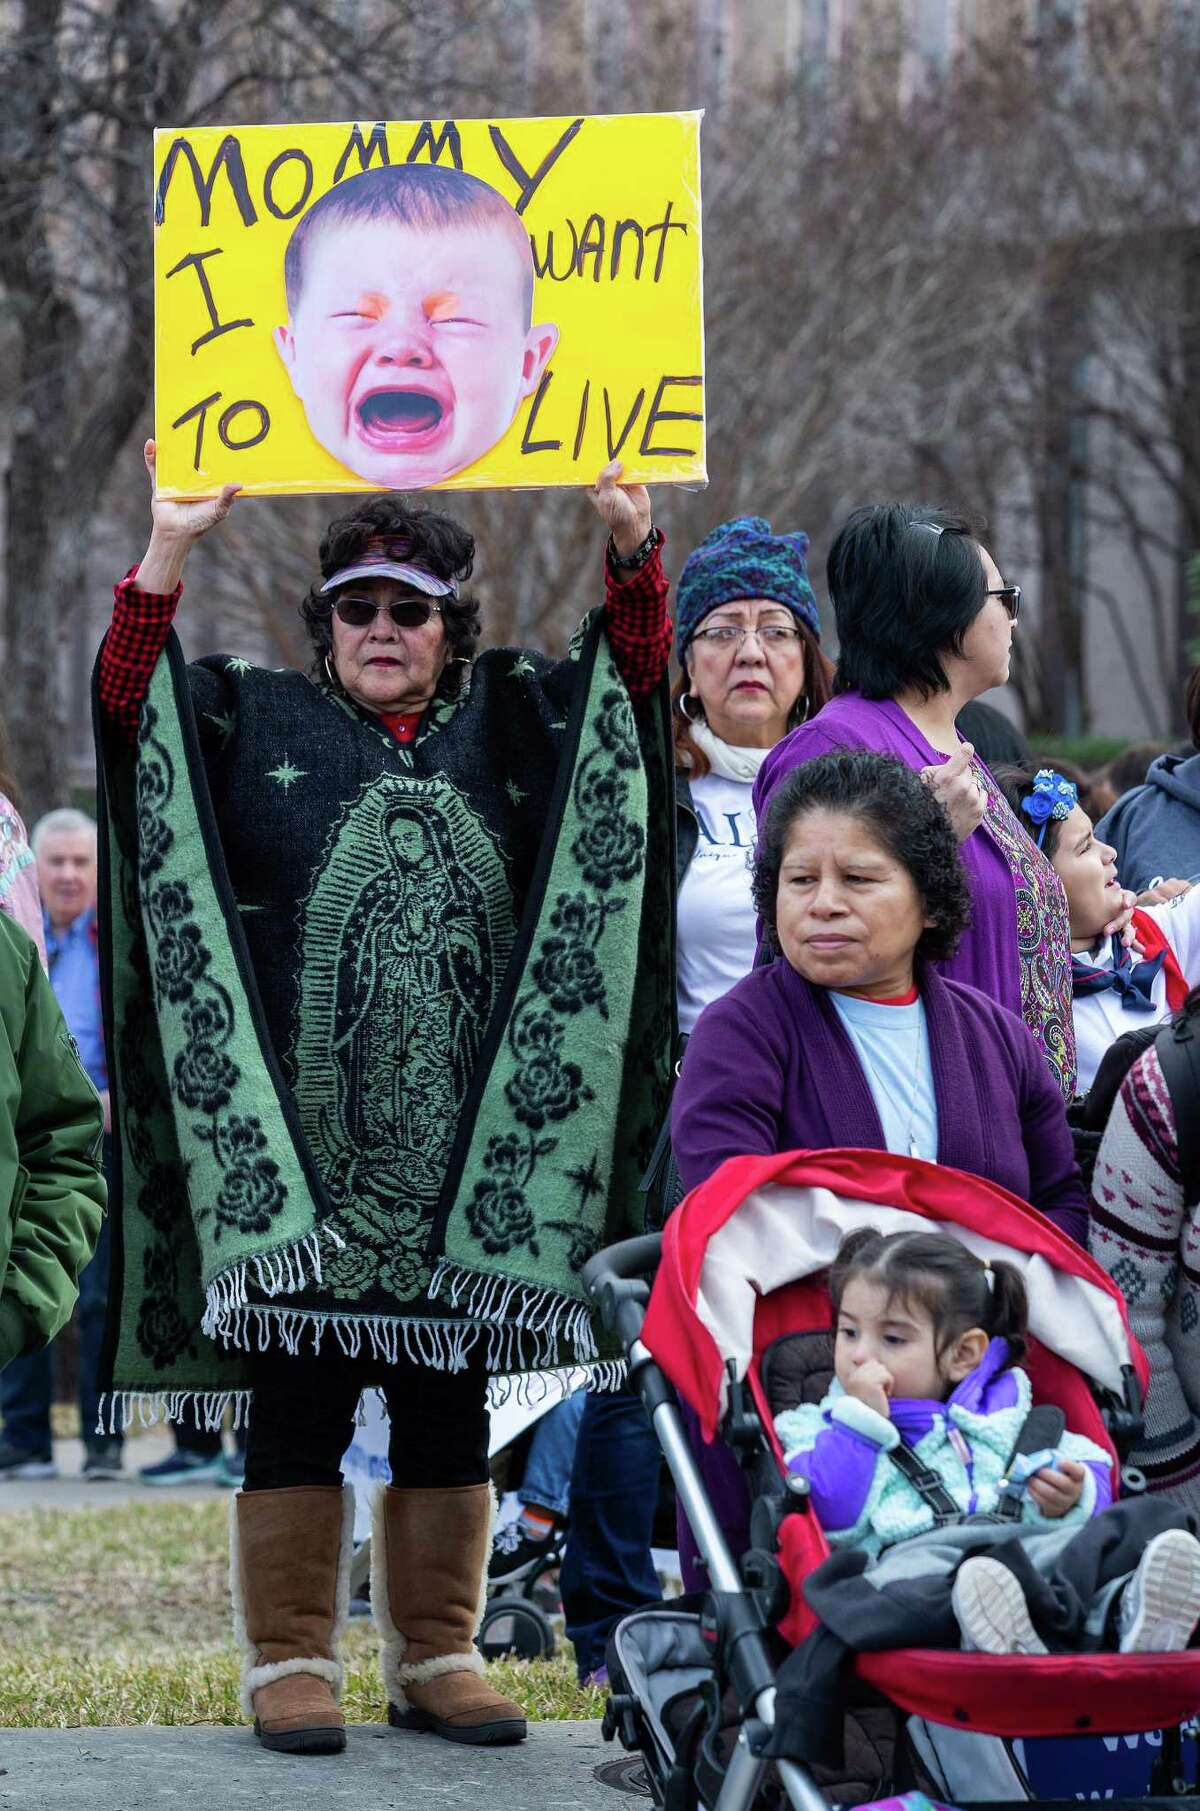 Lupe Rojas, from San Antonio, held up a sign before the start of the march during the Texas Rally for Life at the Texas State Capitol on January 26, 2019 in Austin, Texas.